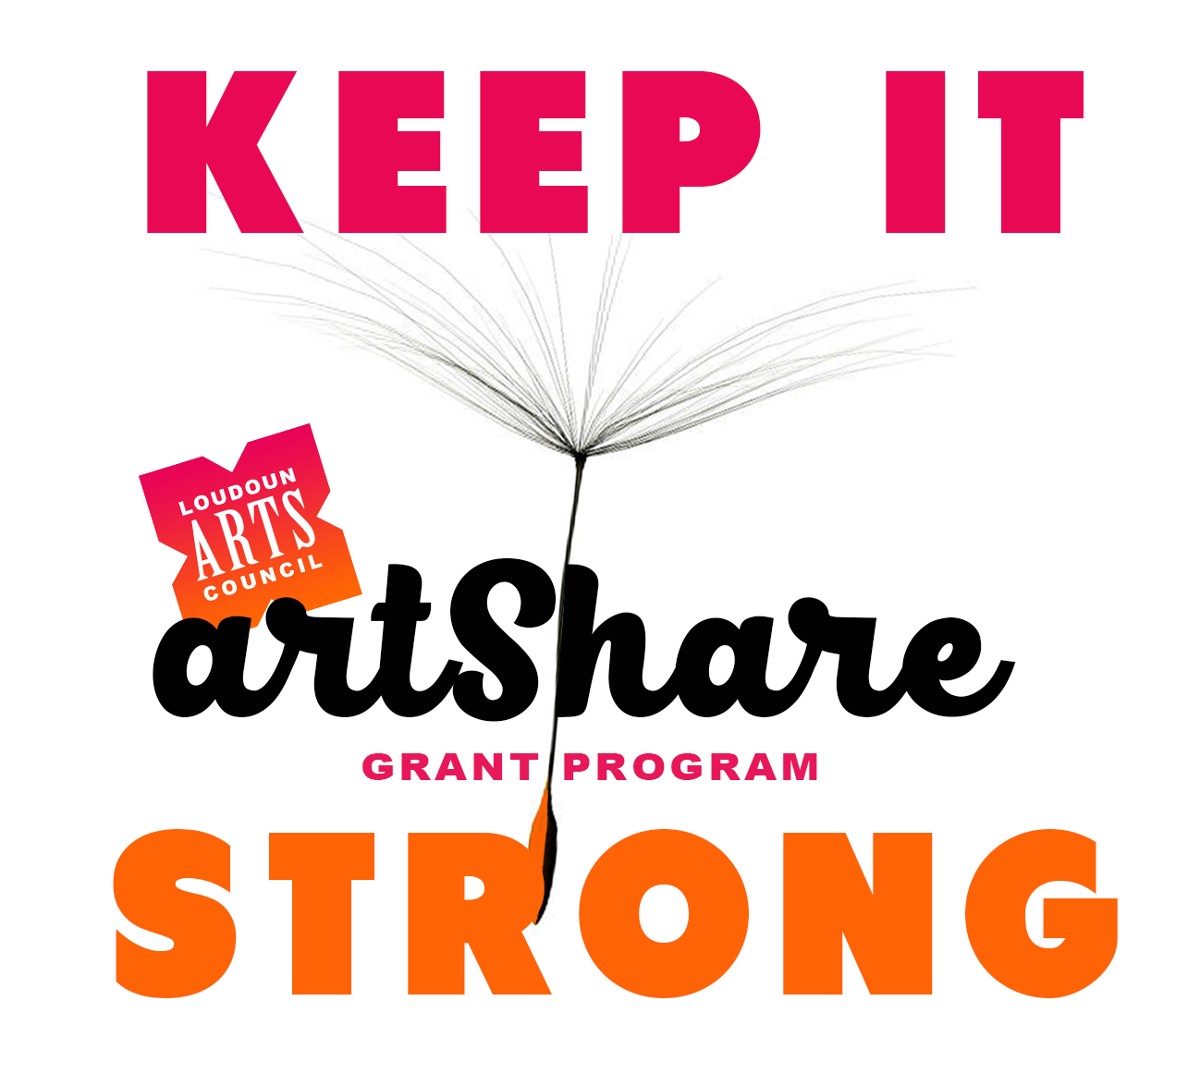 Help fund this grant program for community arts groups